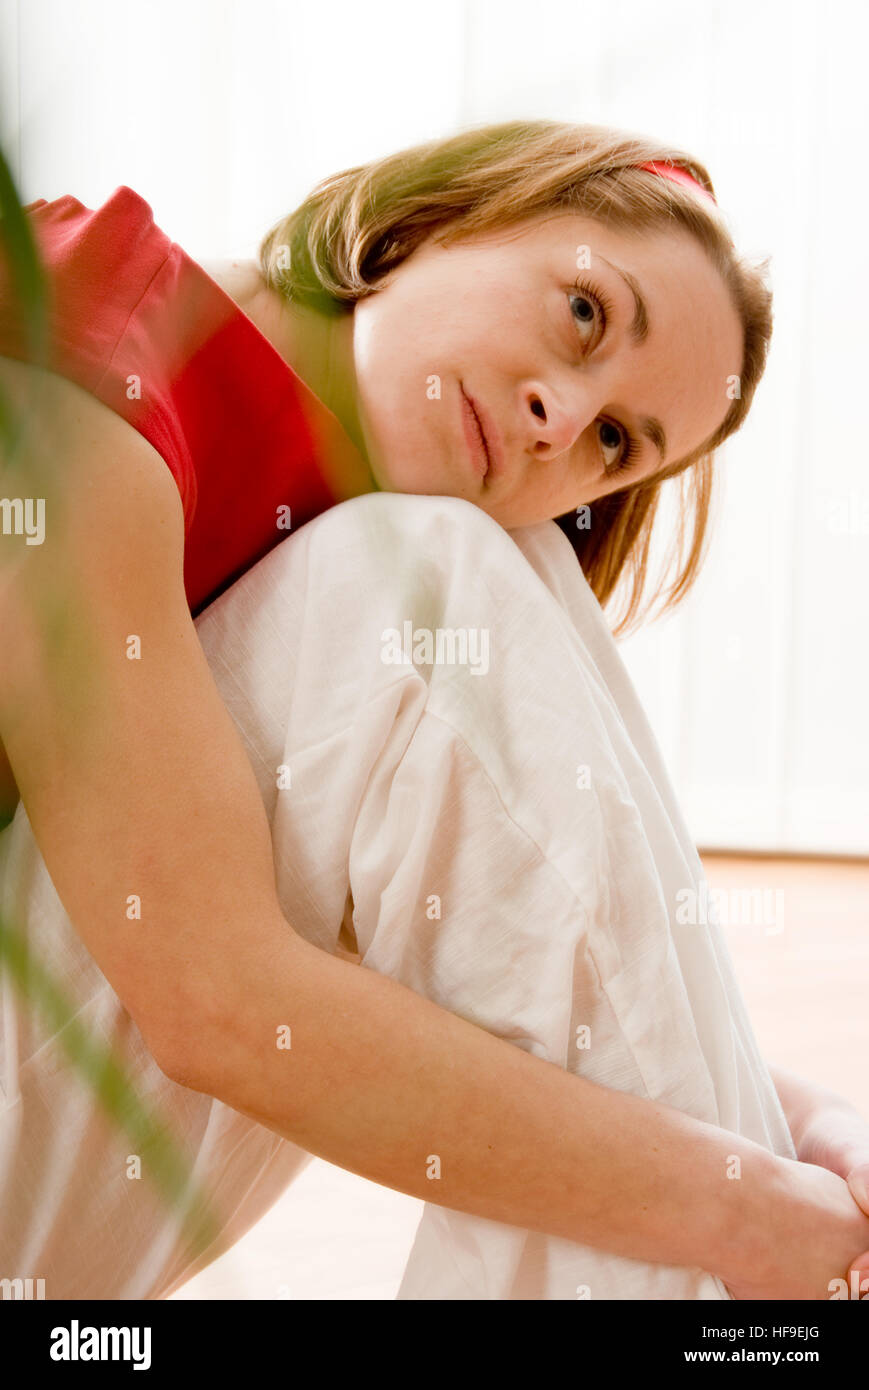 Thoughtfully, young woman Stock Photo